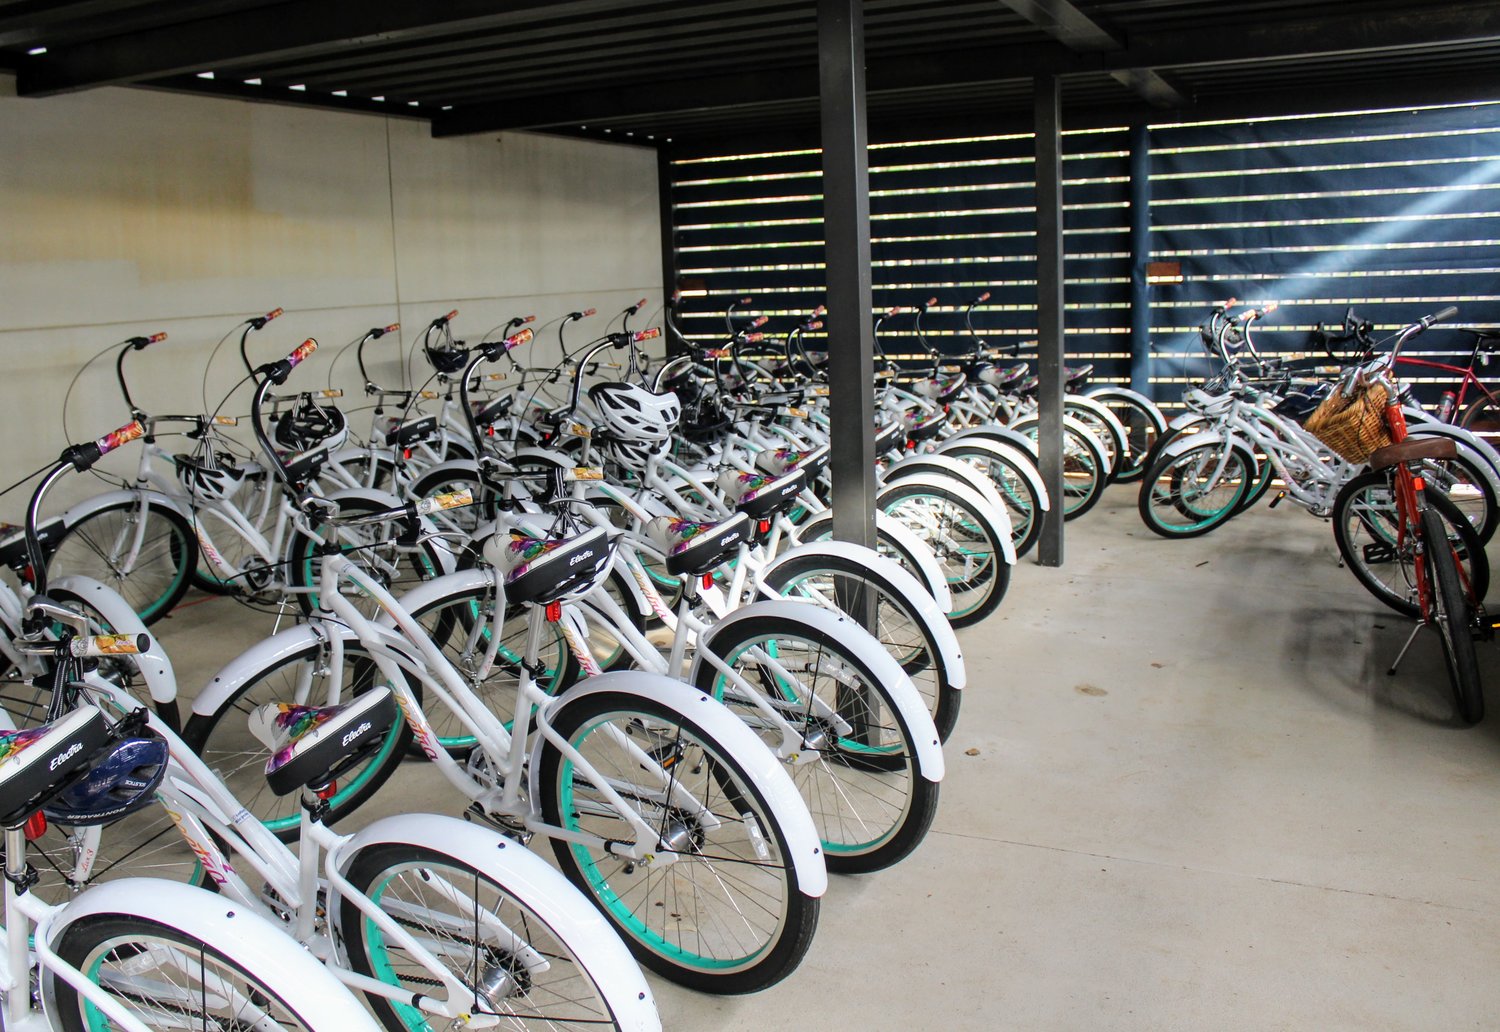 The fleet of bikes were purchased from Infinity Bikes in Orange Beach who worked for weeks to assemble the bikes.